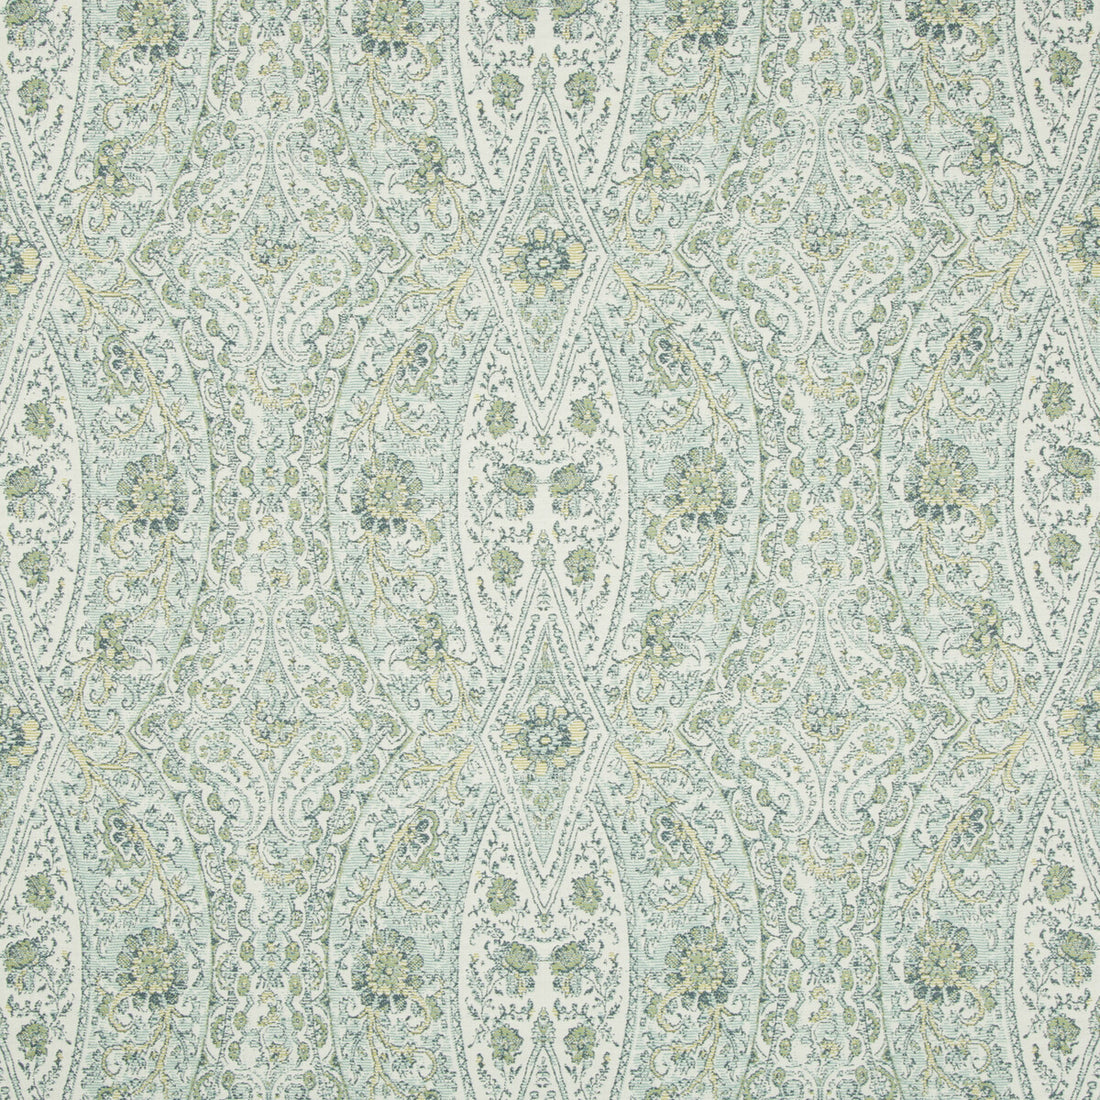 Kravet Design fabric in 34726-35 color - pattern 34726.35.0 - by Kravet Design in the Crypton Home collection